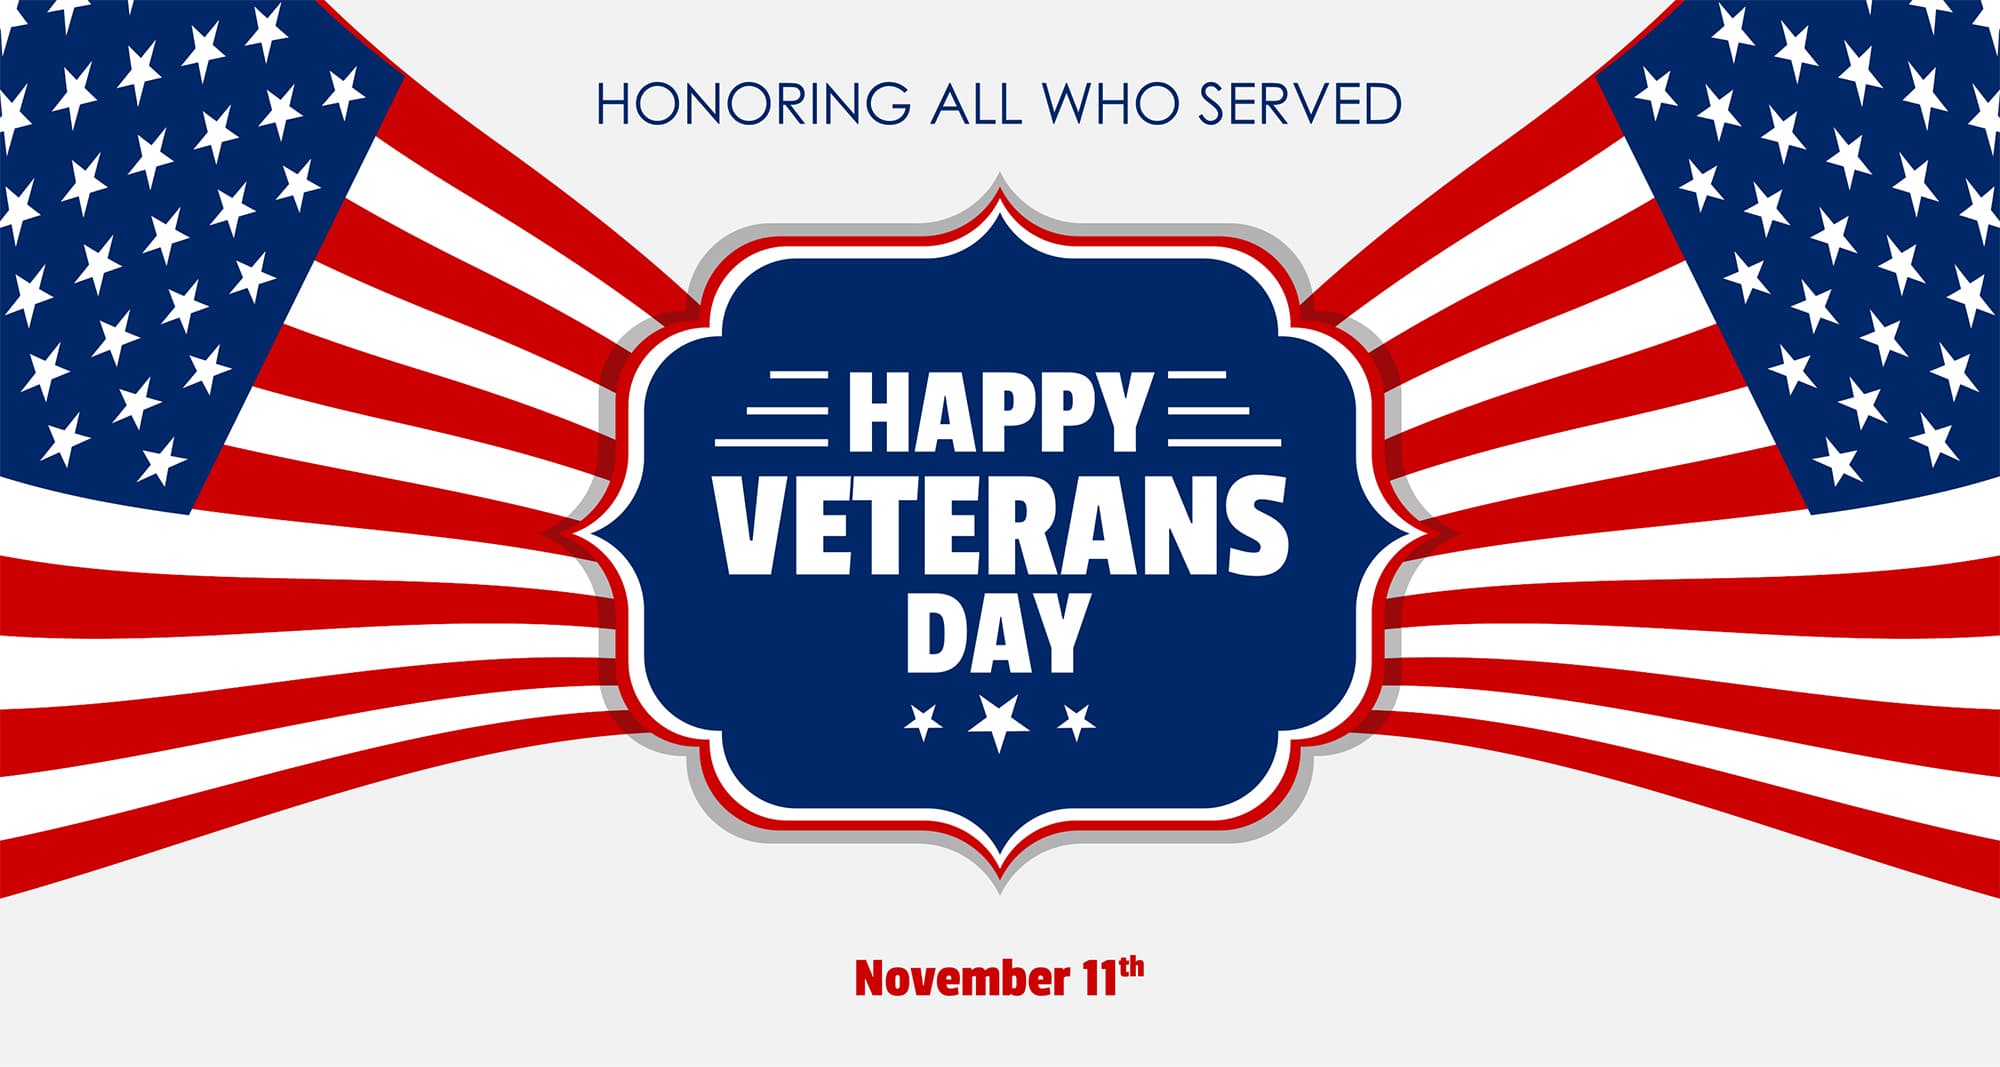 Happy Veterans day with USA flag free vector illustration design